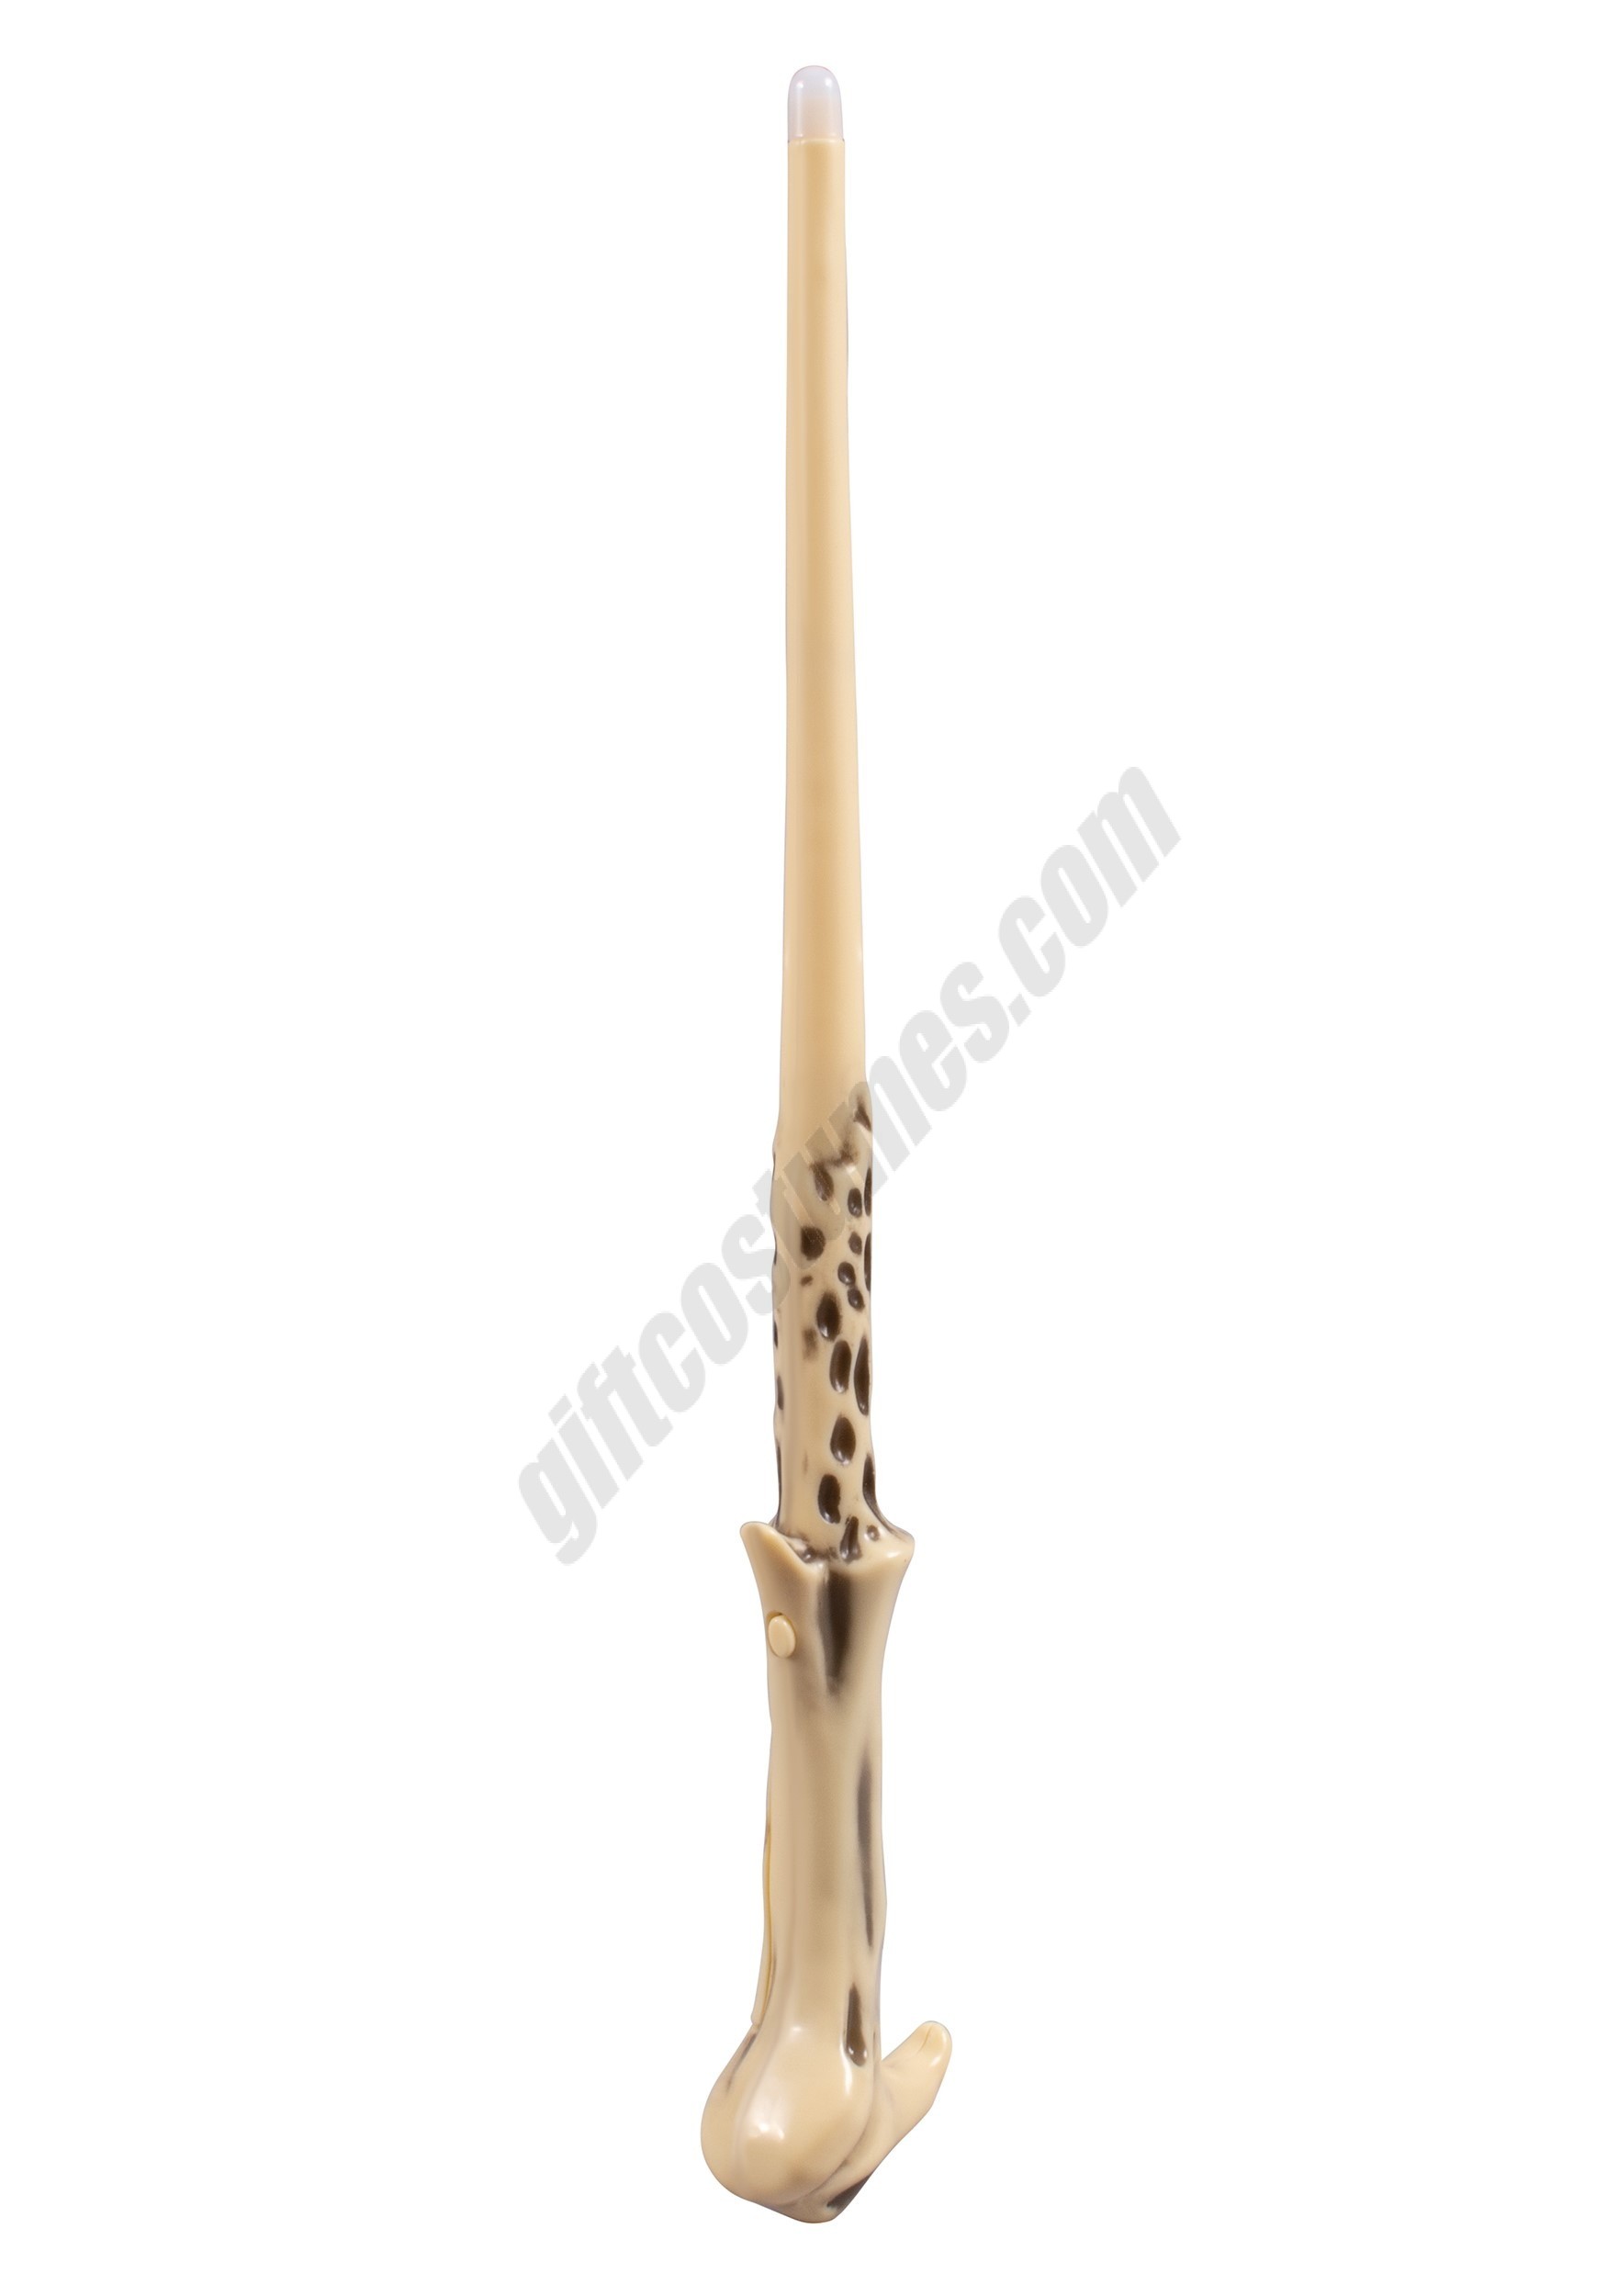 Harry Potter Deluxe Light Up Voldemort Wand Promotions - Harry Potter Deluxe Light Up Voldemort Wand Promotions